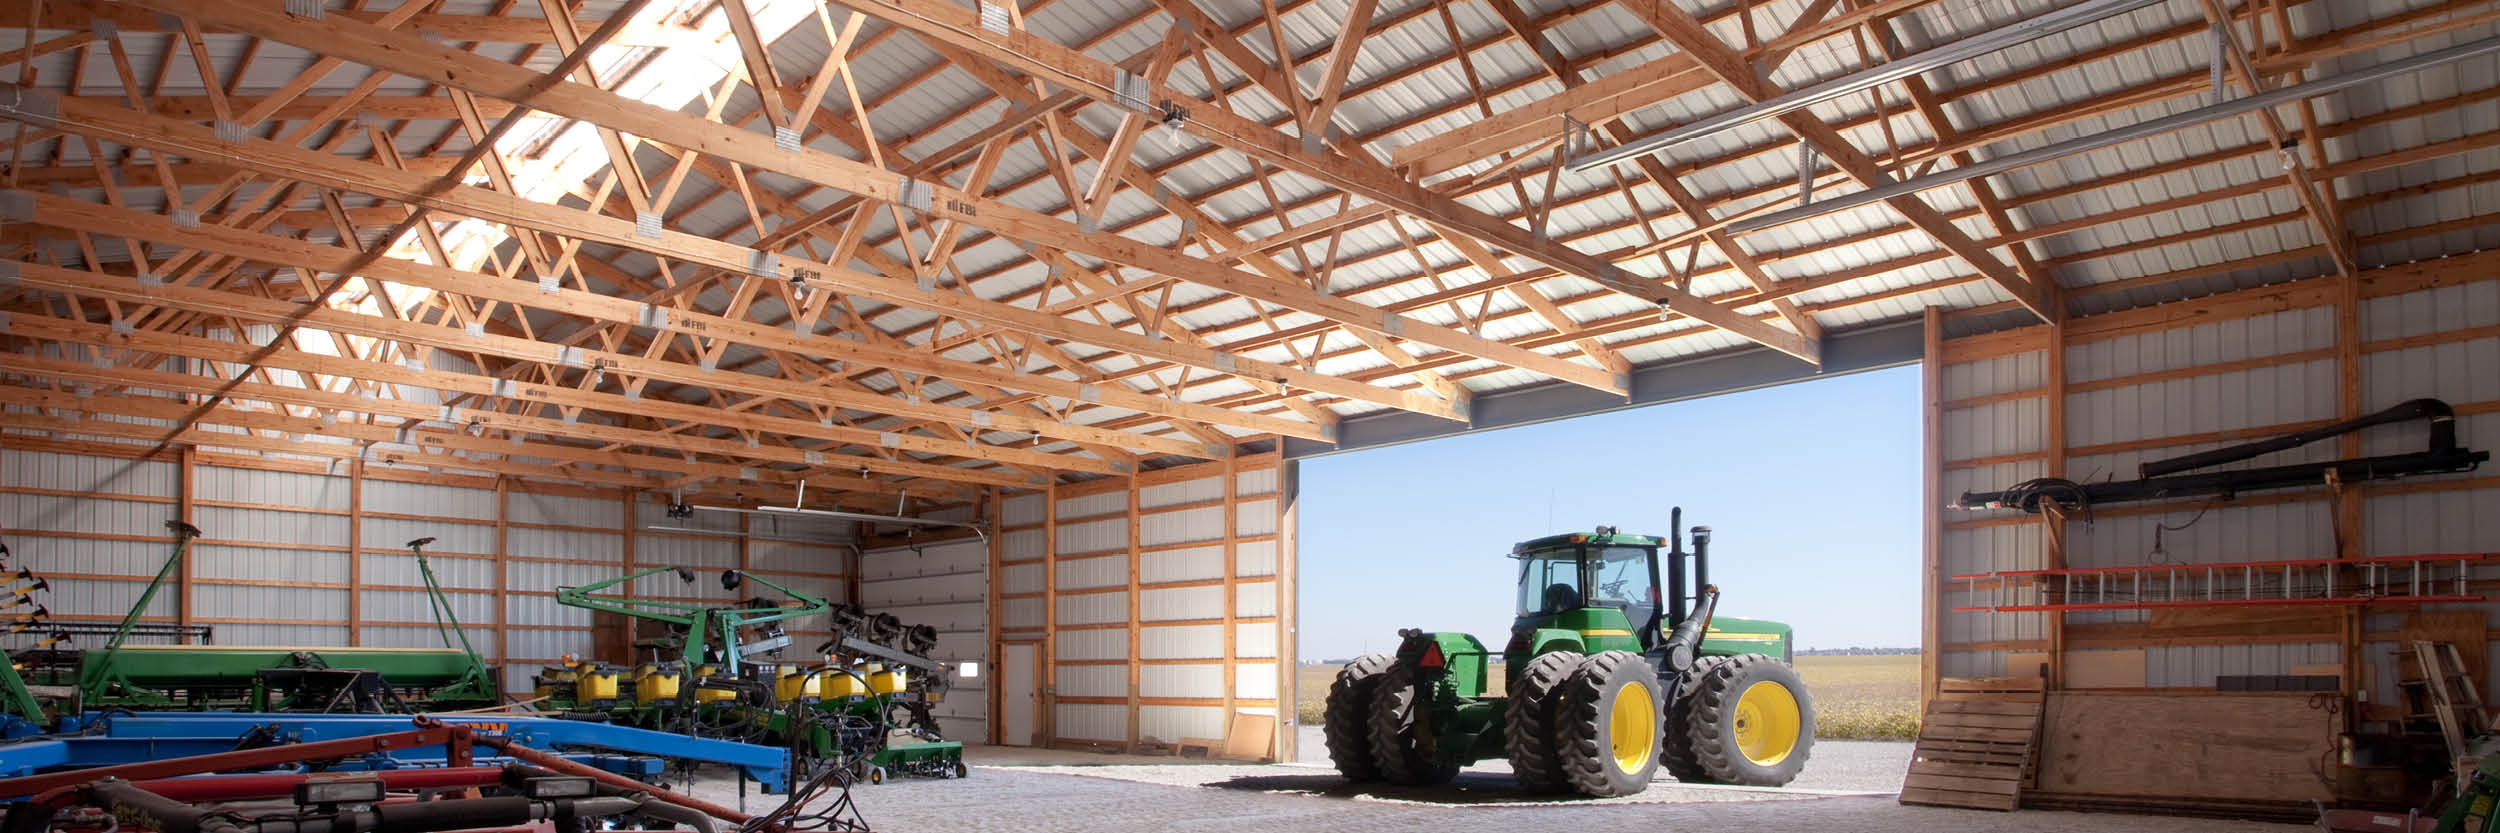 6 Types of Lumber Used in Pole Barn Construction